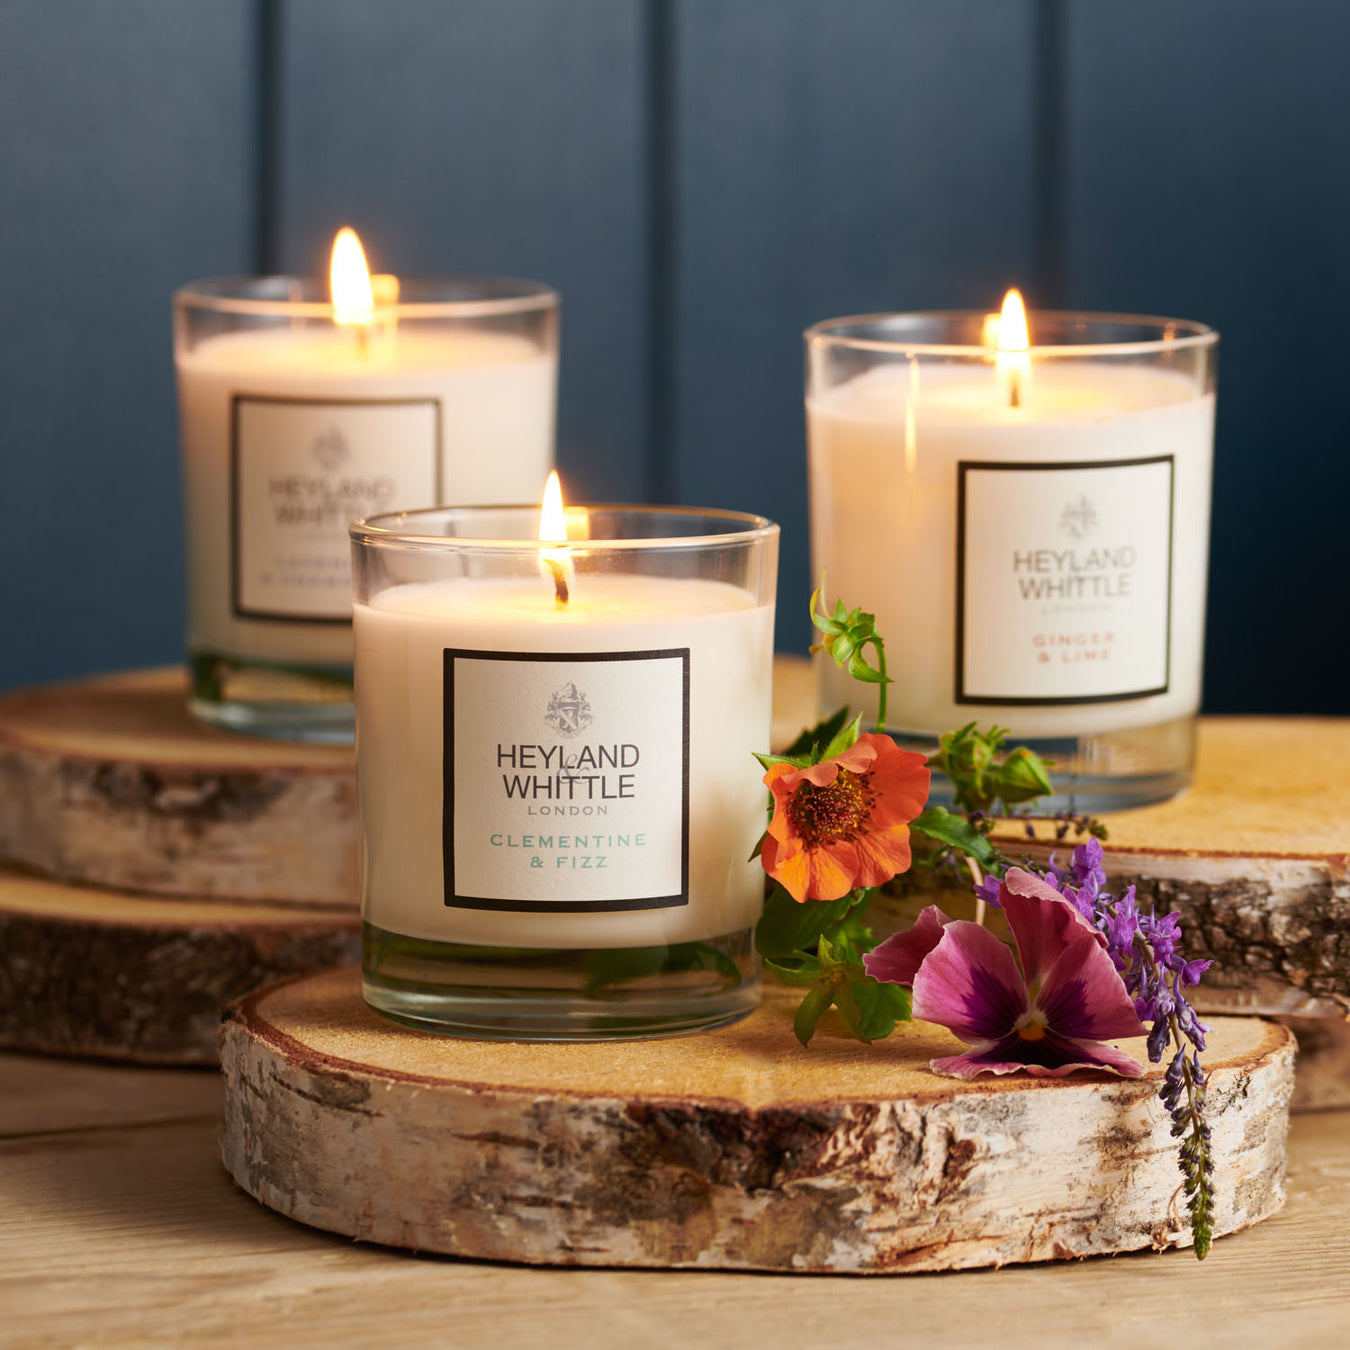 Classic Candles in a Glass: £24 each or 2 for £42